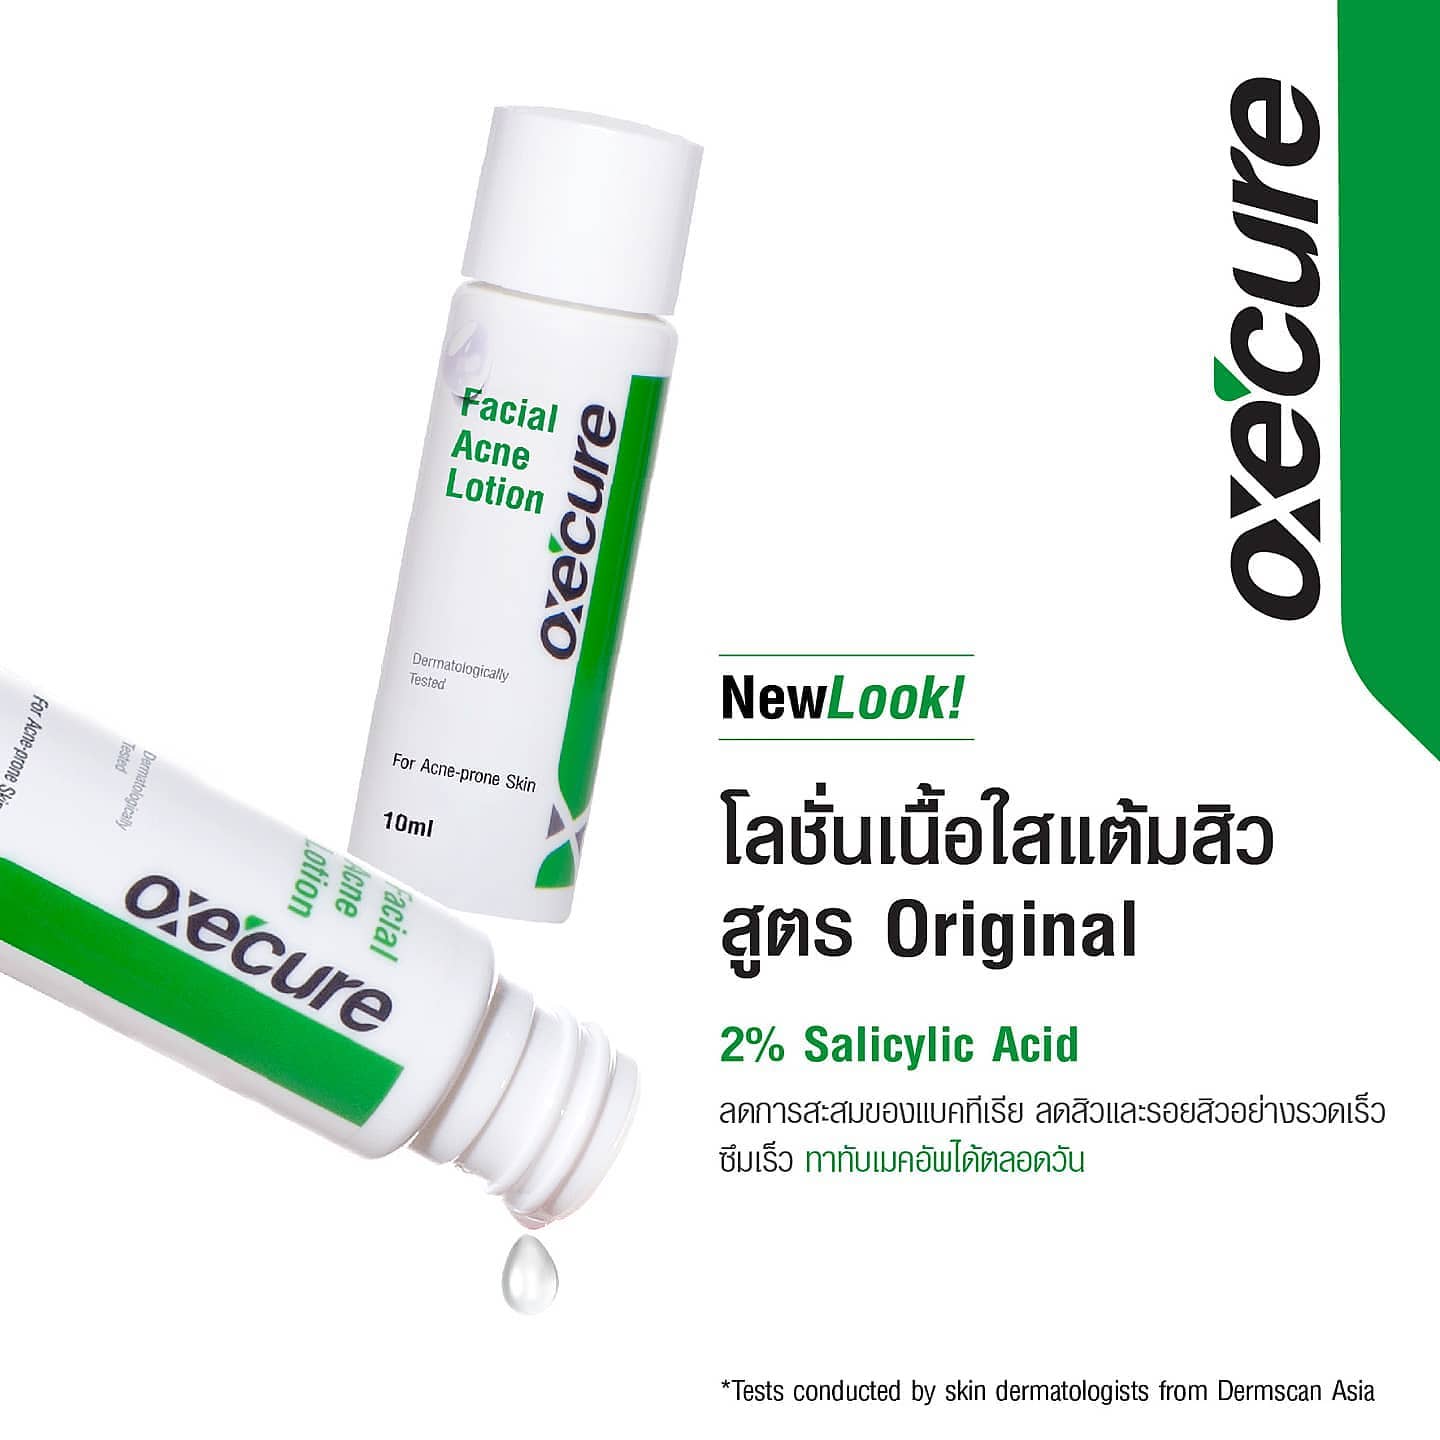 OXE'CURE Facial Acne Lotion